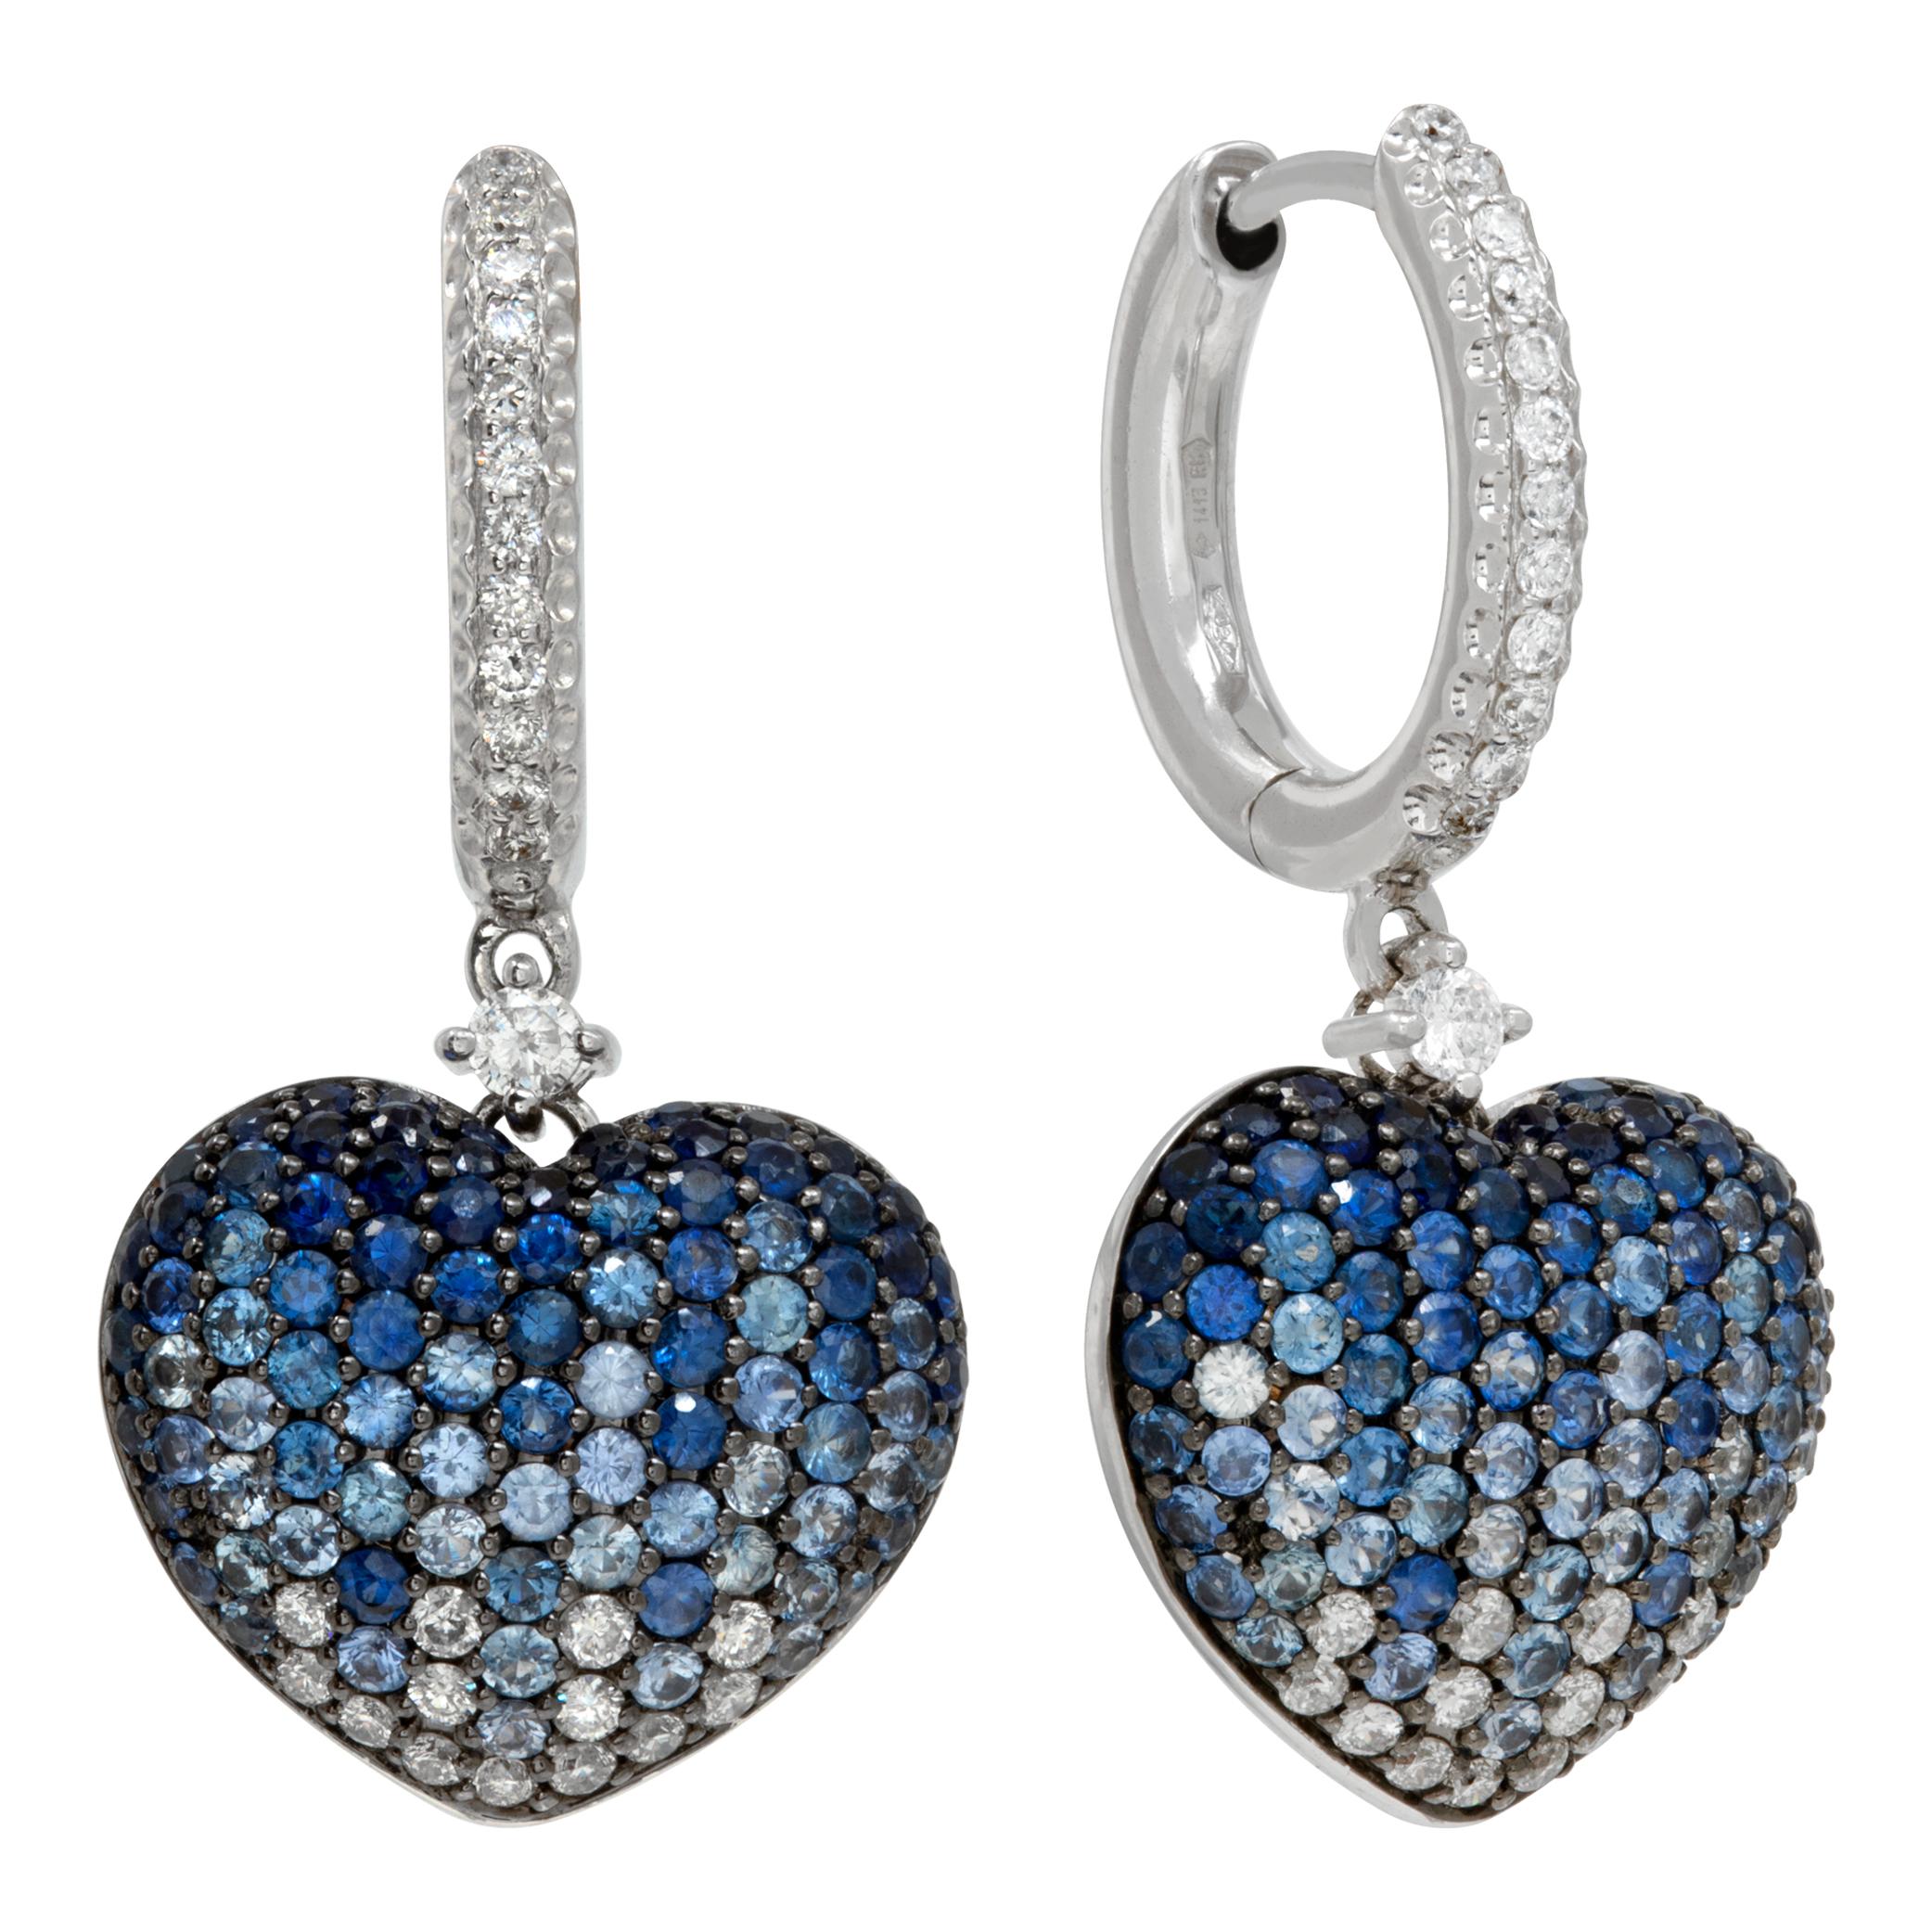 Dangling sapphire & diamond heart earrings in 18k white gold. Approximately 0.47 carats in diamonds and 2.13 carats in blue sapphires. 1.25 inch hanging length.